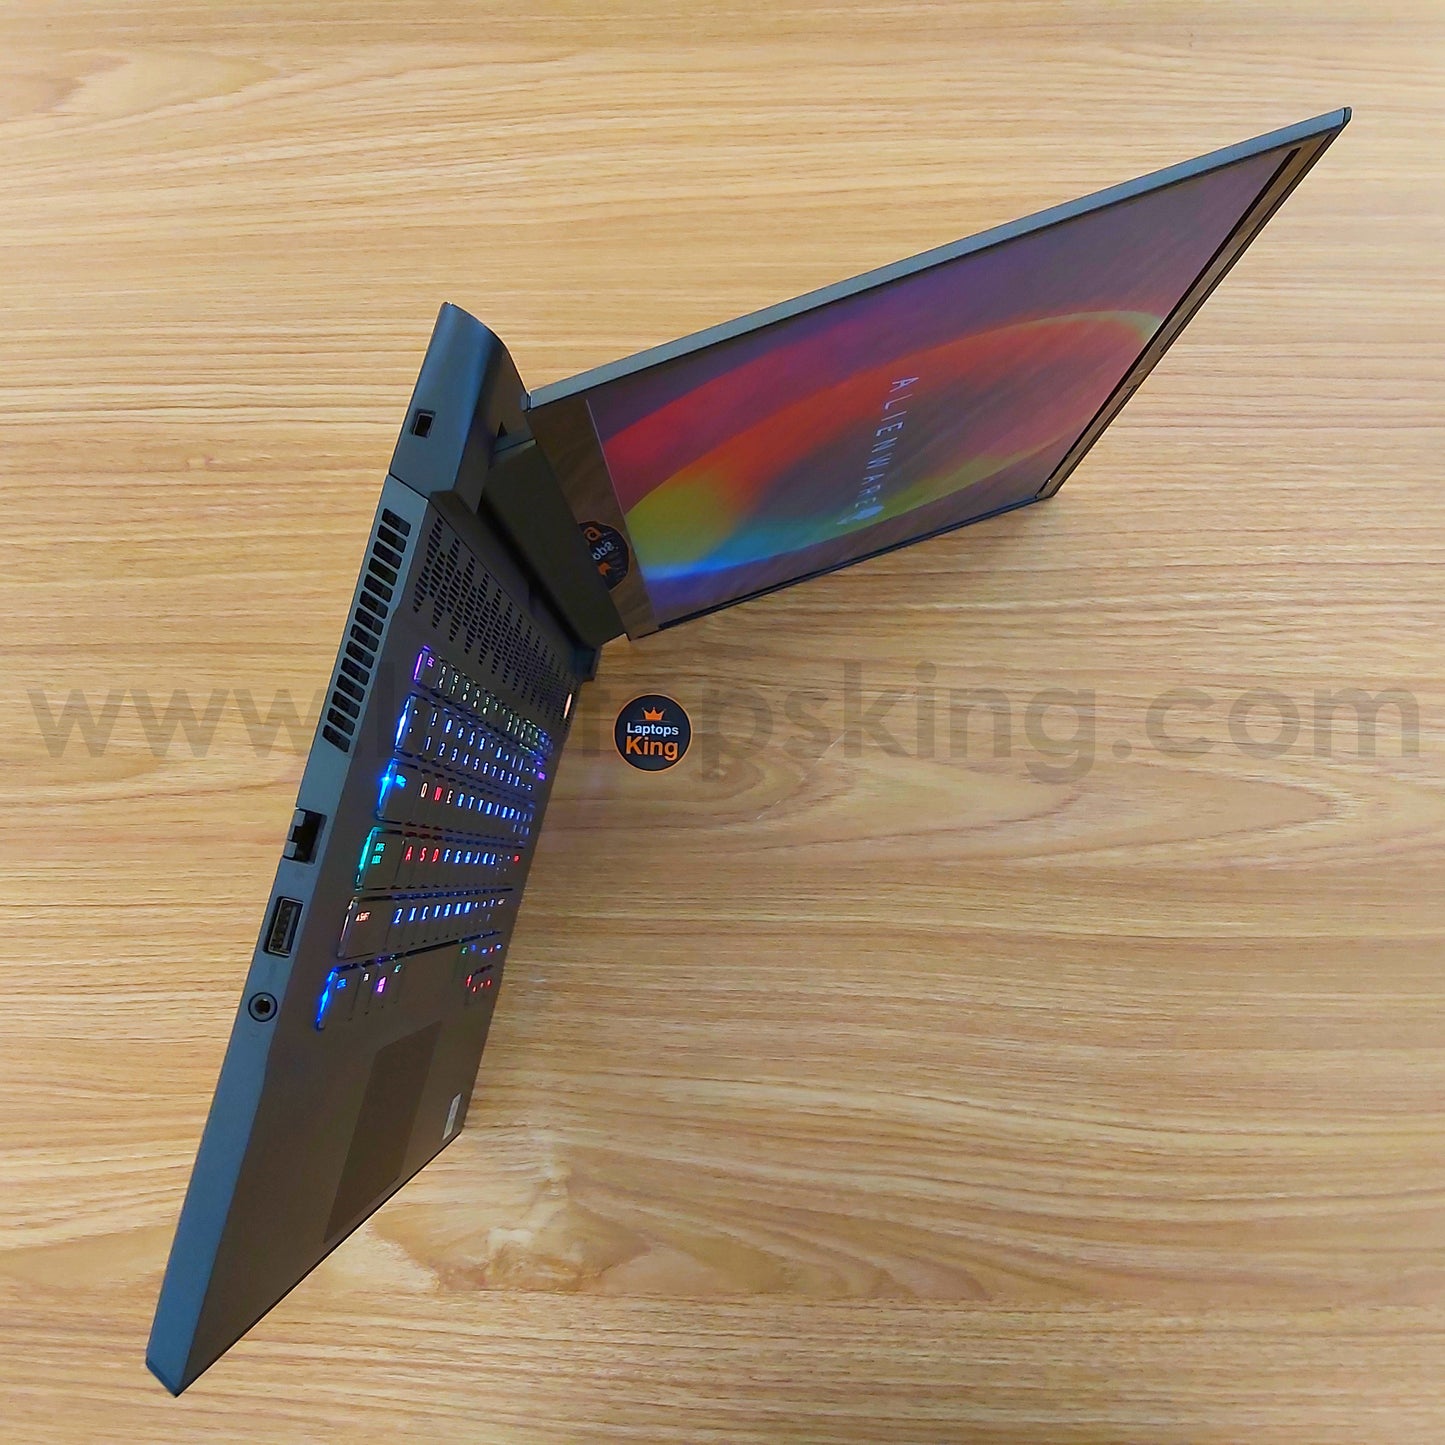 Alienware M15 R4 i7-10870h Rtx 3070 300hz Gaming Laptop (Open Box) Gaming laptop, Graphic Design laptop, best laptop for gaming, best laptop for graphic design, computer for sale Lebanon, laptop for video editing in Lebanon, laptop for sale Lebanon, best graphic design laptop,	best video editing laptop, best programming laptop, laptop for sale in Lebanon, laptops for sale in Lebanon, laptop for sale in Lebanon, buy computer Lebanon, buy laptop Lebanon.